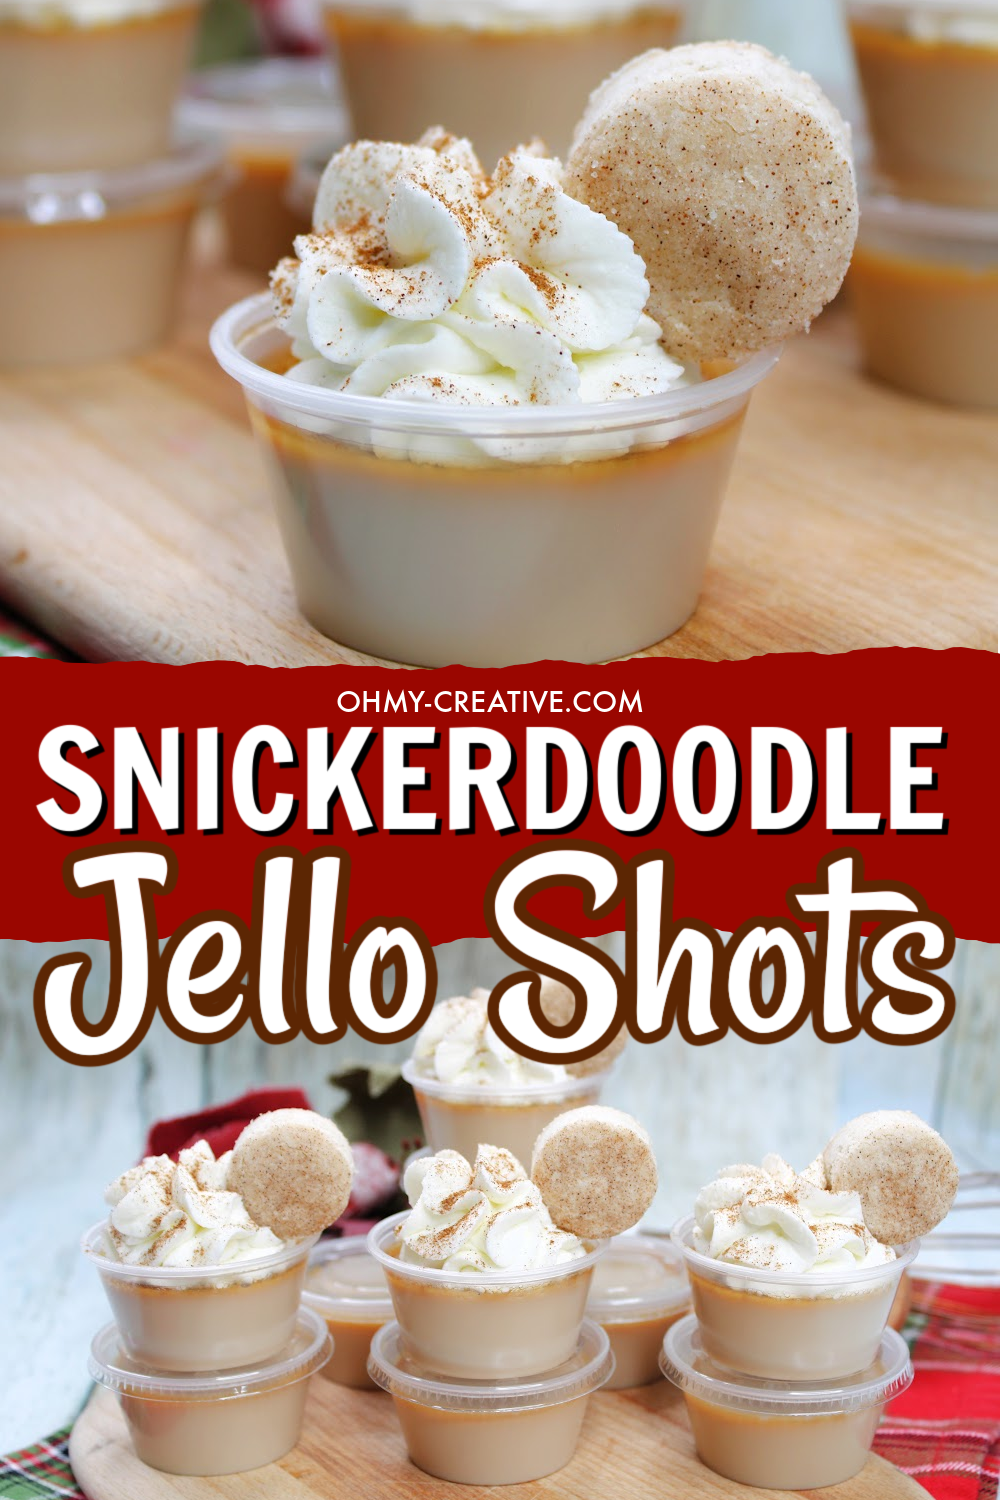 a double image snickerdoodle jello shots on a wooden tray with pinterest text.